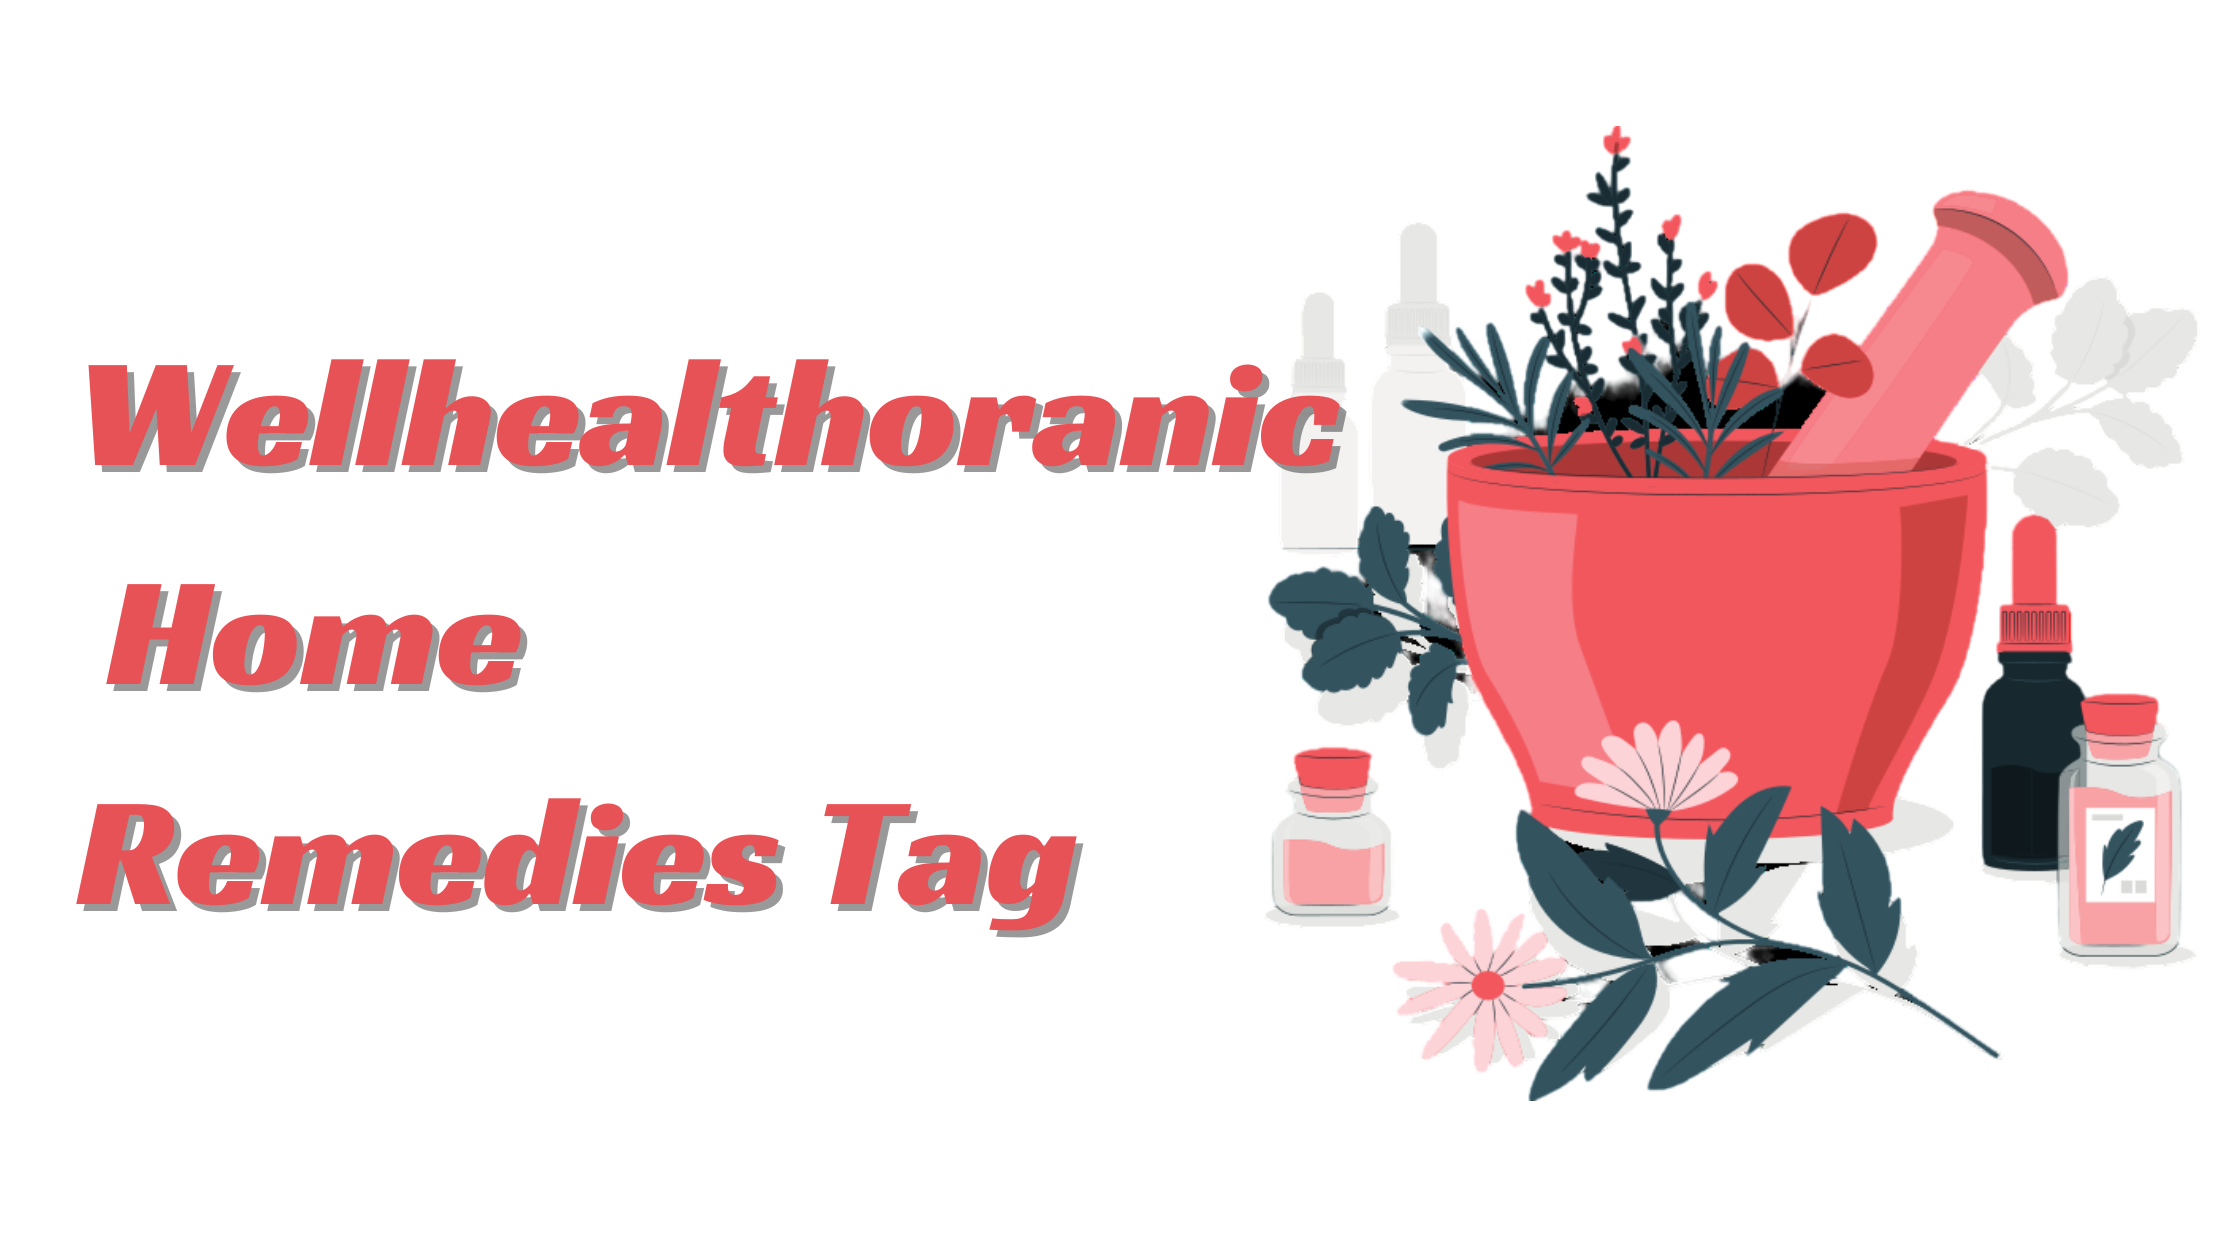 Wellhealthorganic Home Remedies Tag for Prevention, Usage, and Considerations